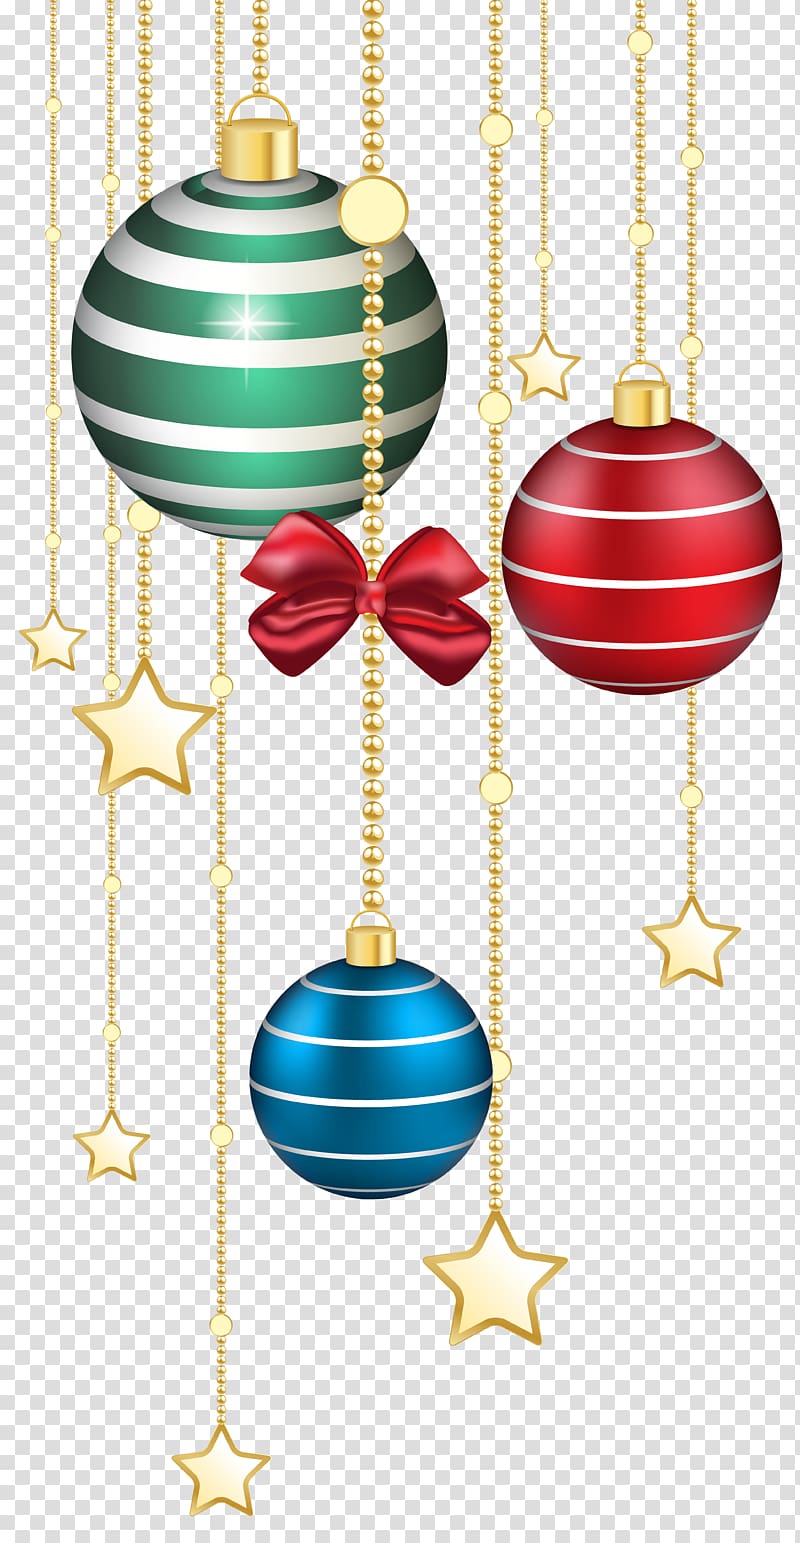 several bauble stickers, Christmas ornament Christmas Day Icon , Christmas Balls Decor transparent background PNG clipart